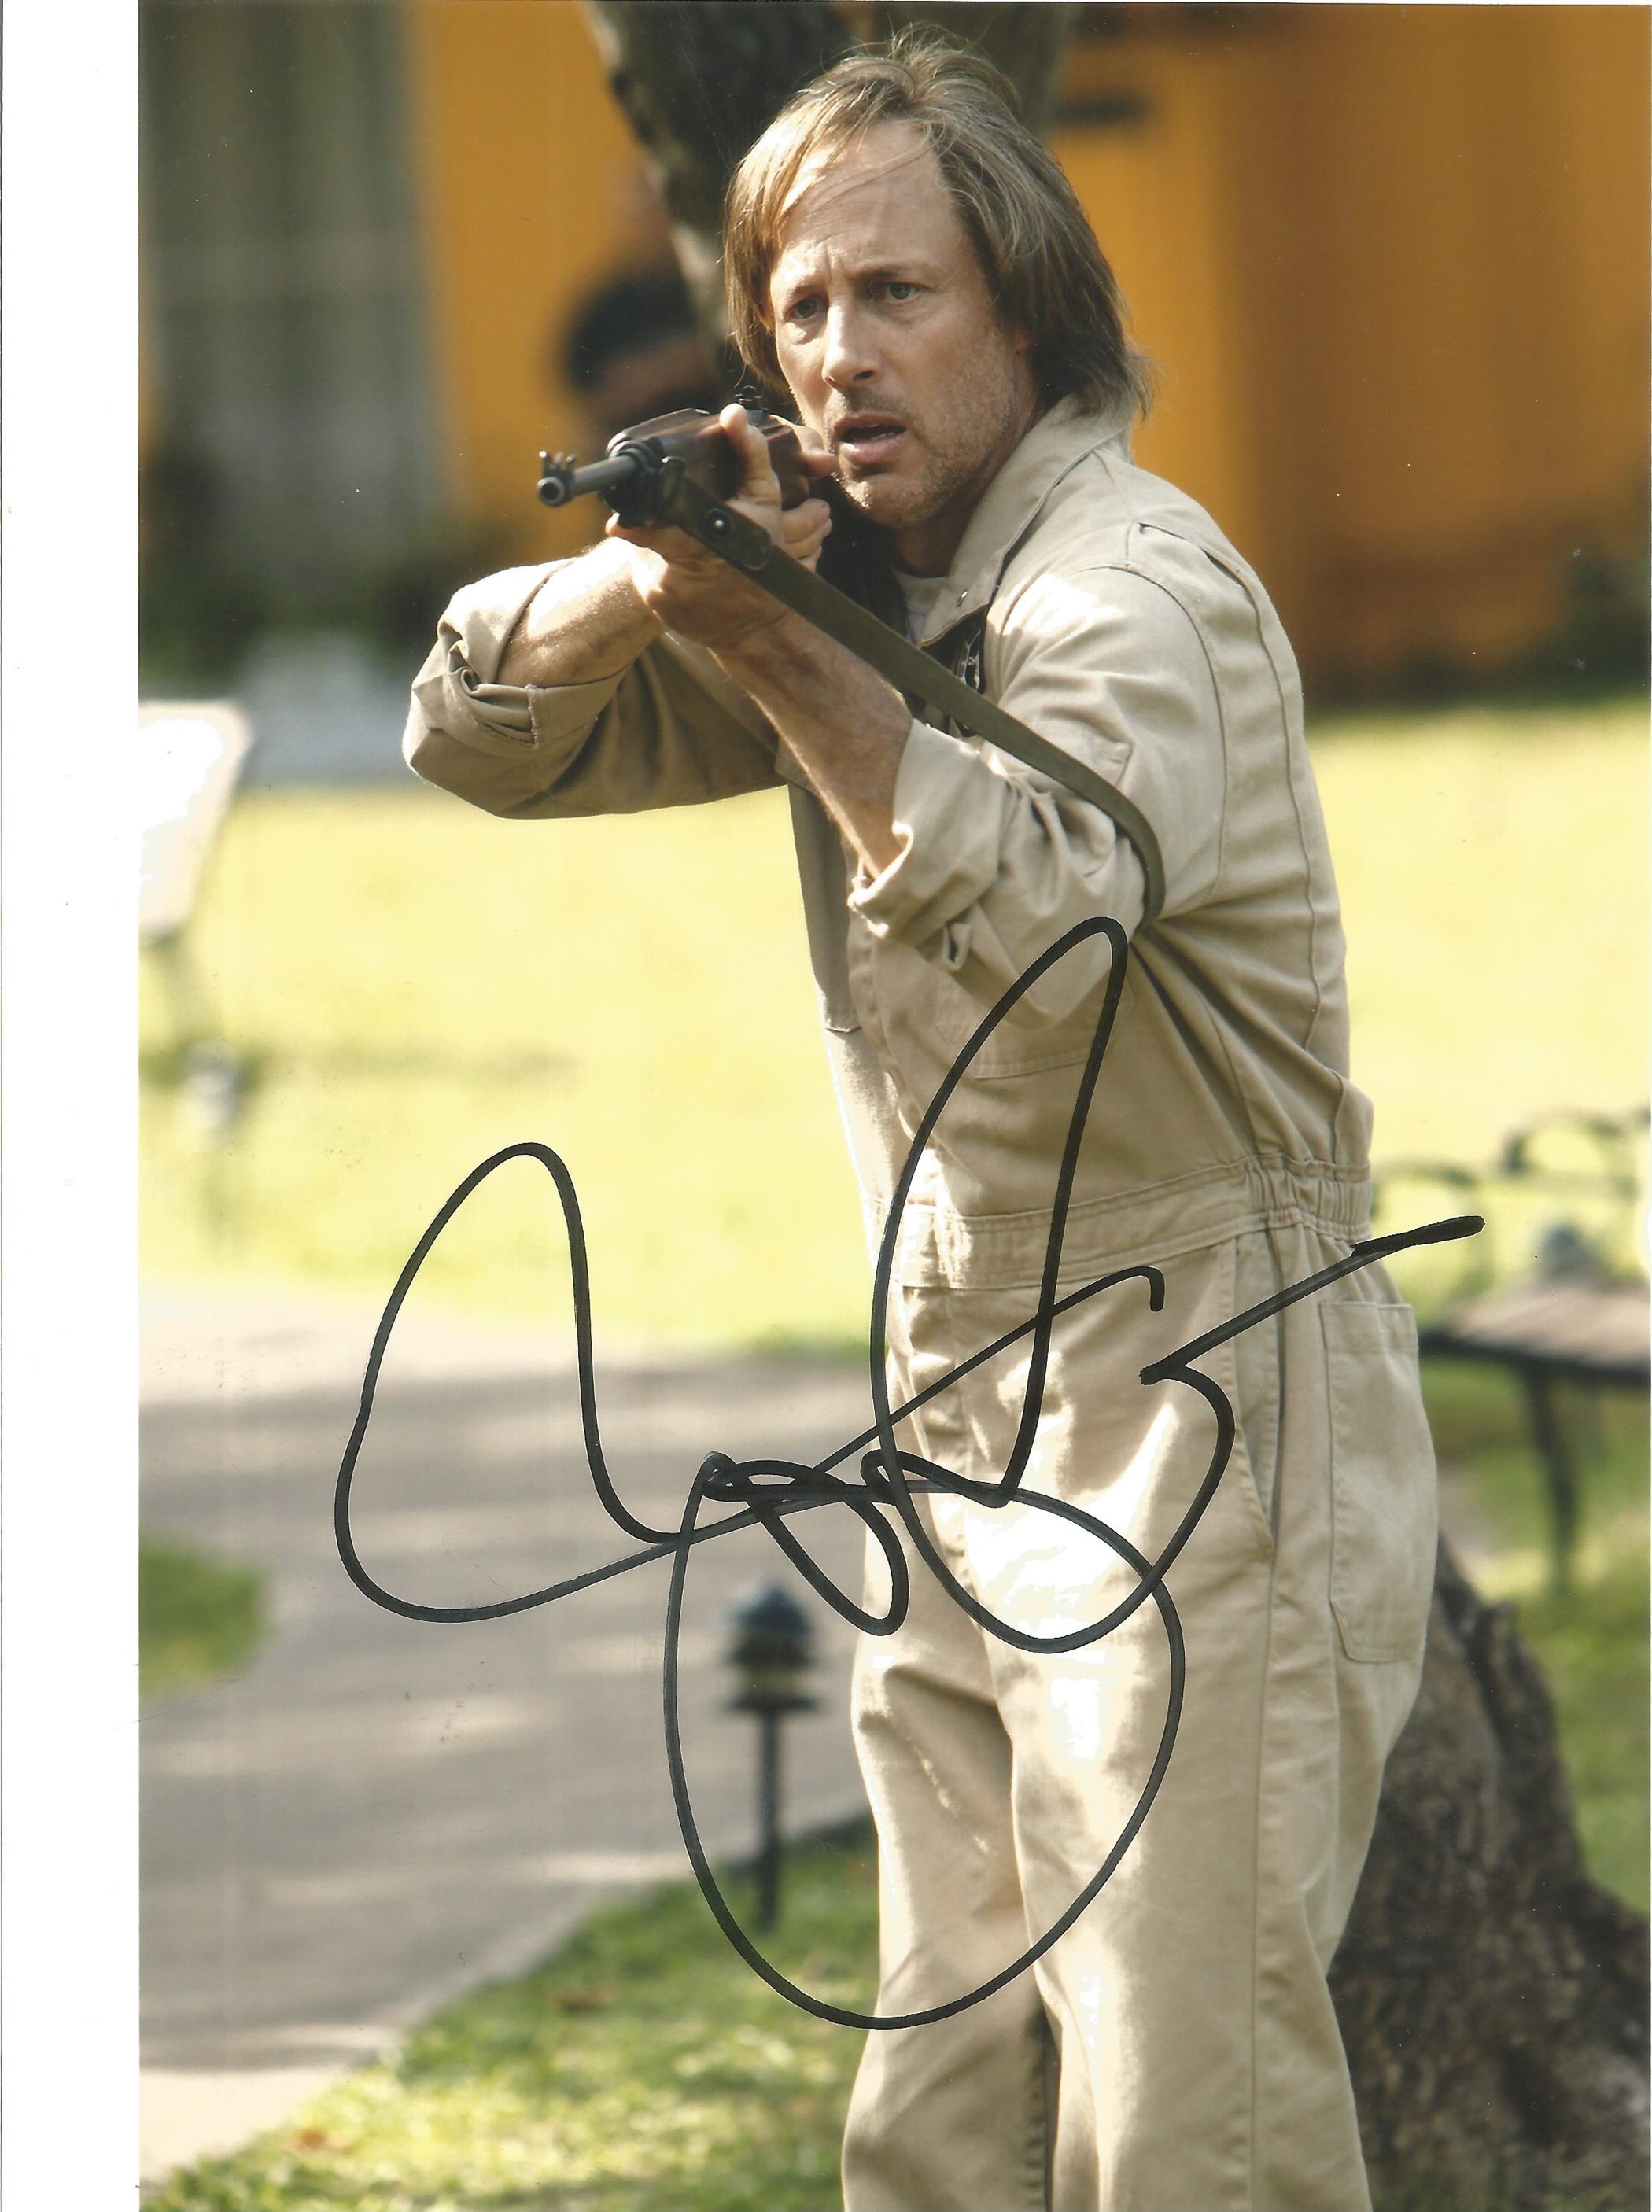 Jon Gries Signed 10 x 8 inch Colour Photo. Good condition. All autographs come with a Certificate of